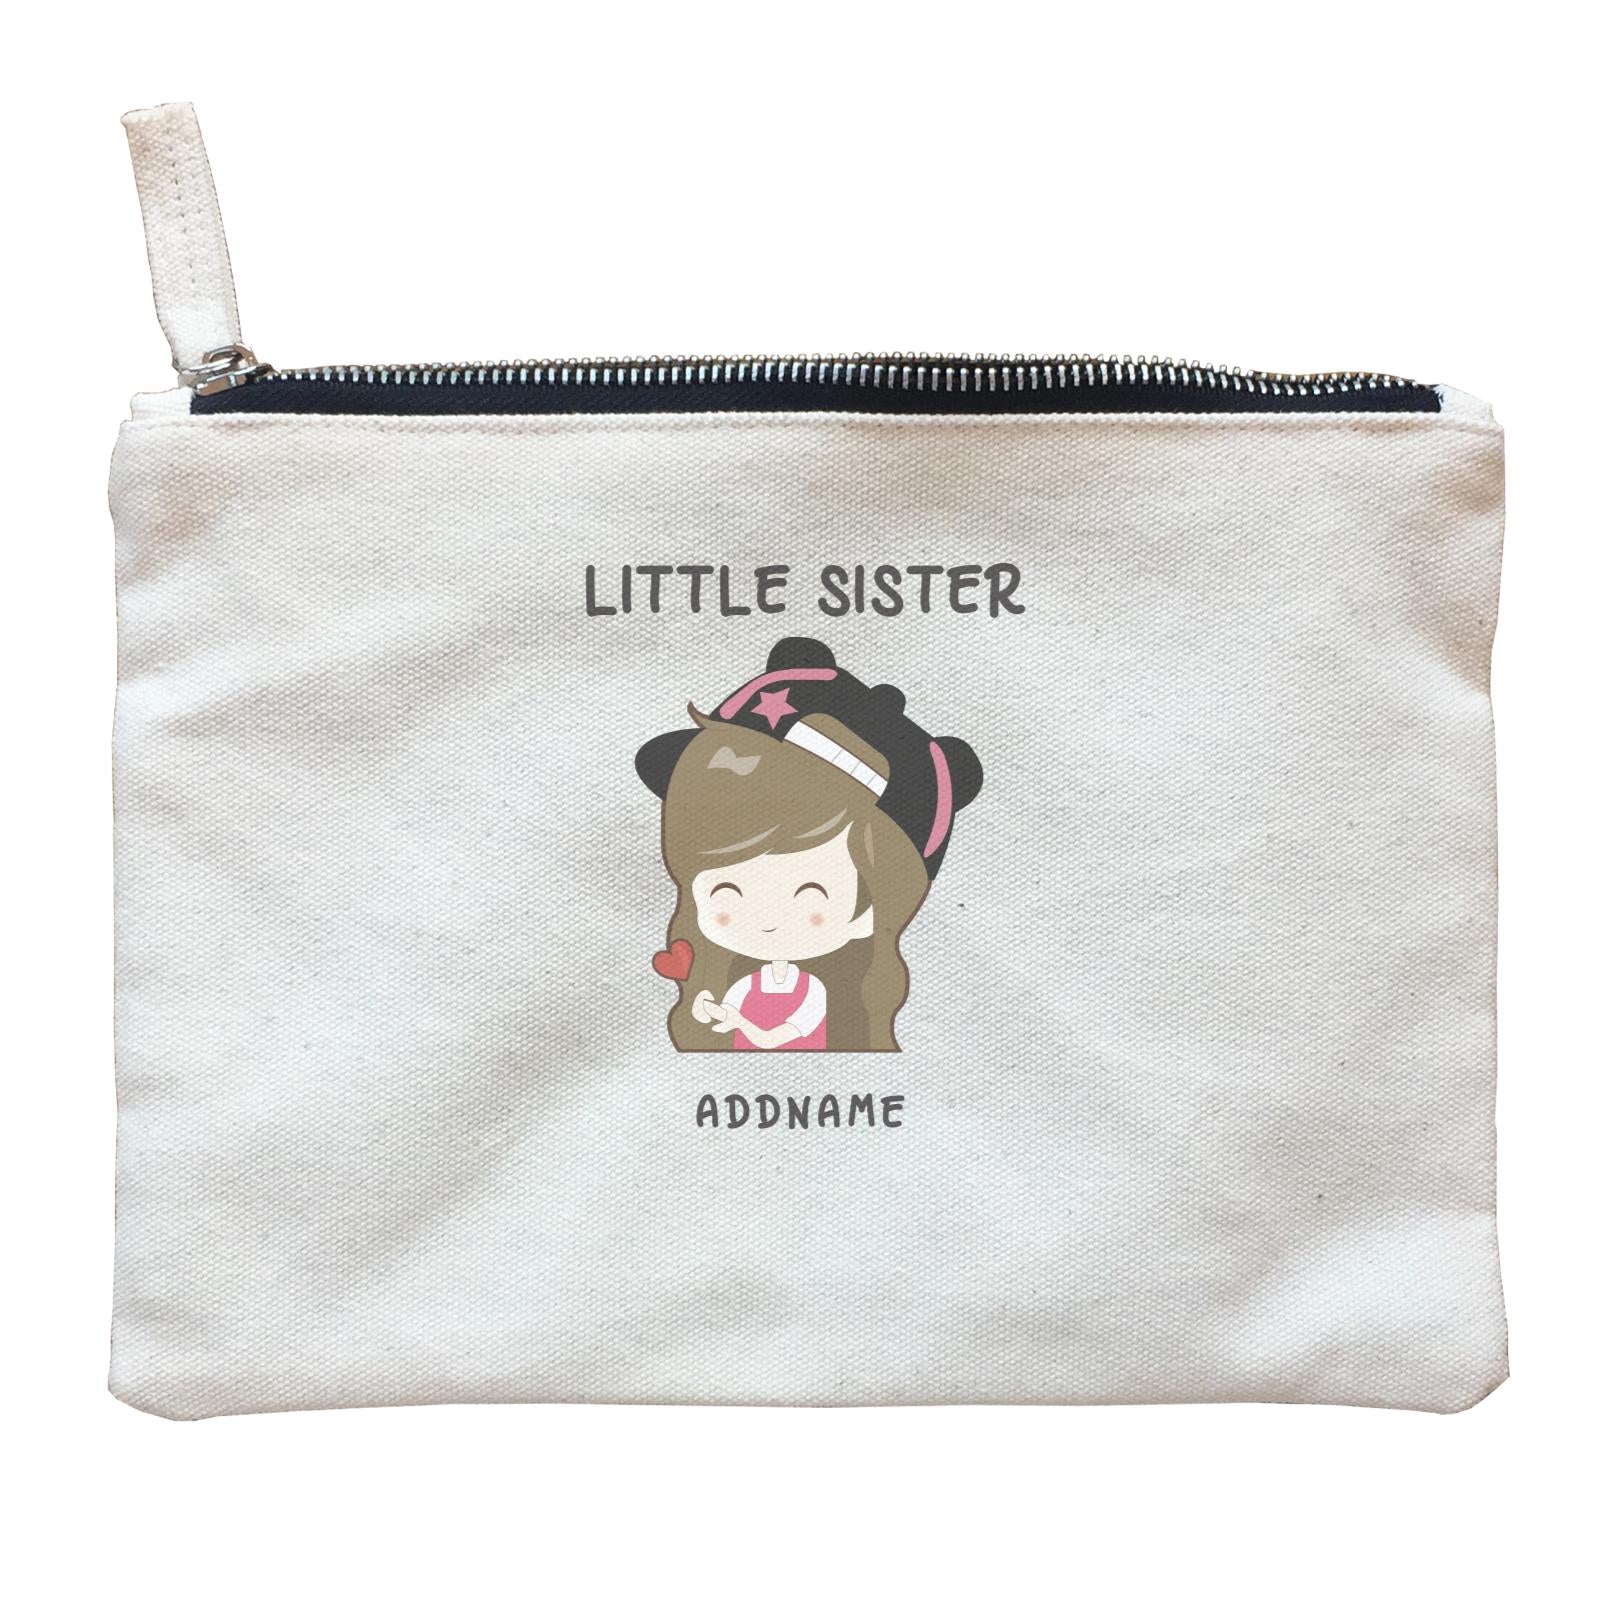 My Lovely Family Series Little Sister Addname Zipper Pouch